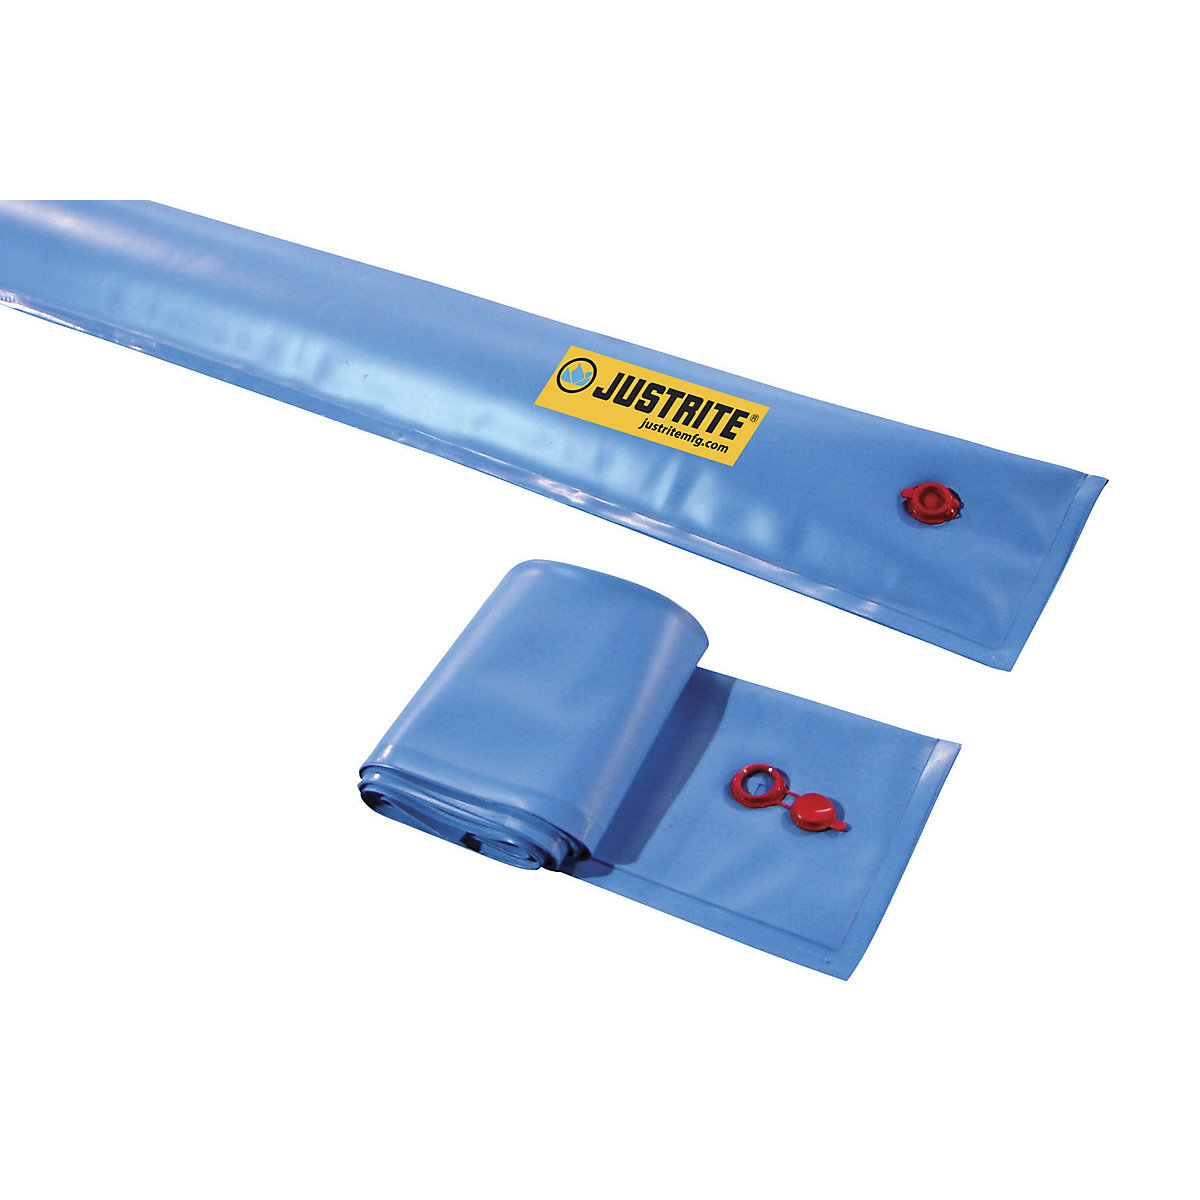 Barrier roll for filling with water - Justrite